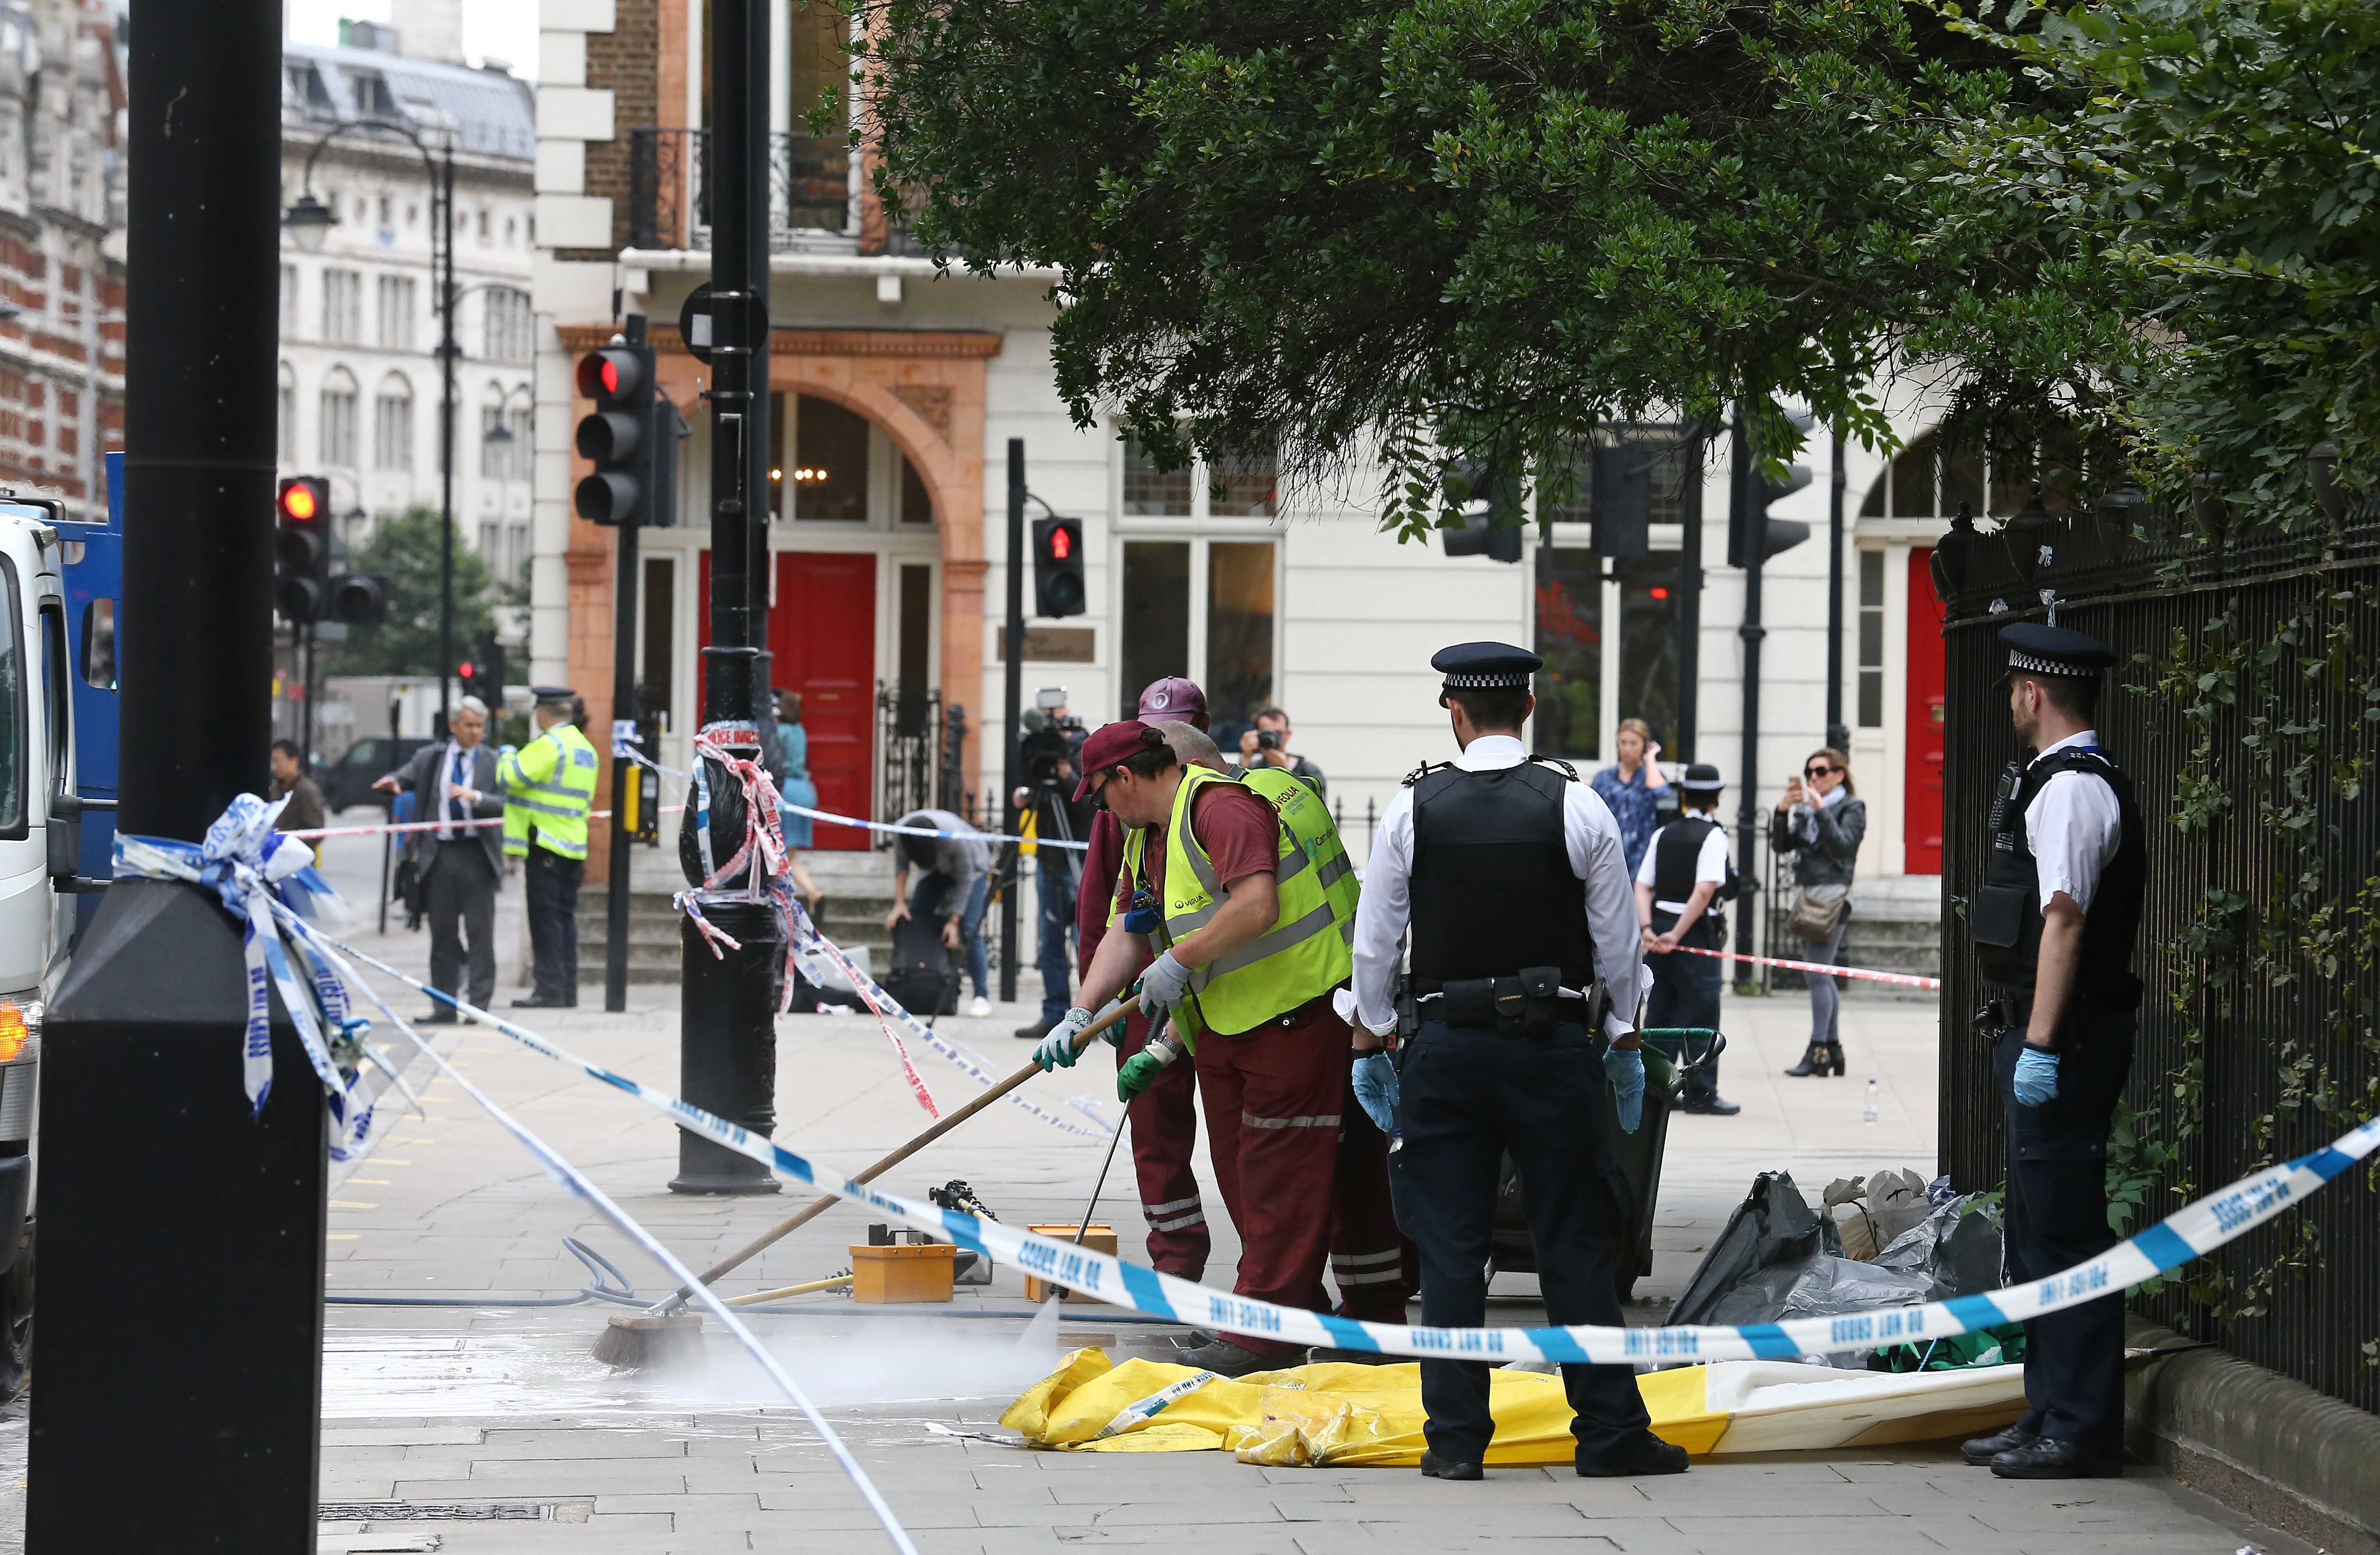 The crime scene is cleaned in London's Russell Square on August 4, 2016. (Getty)